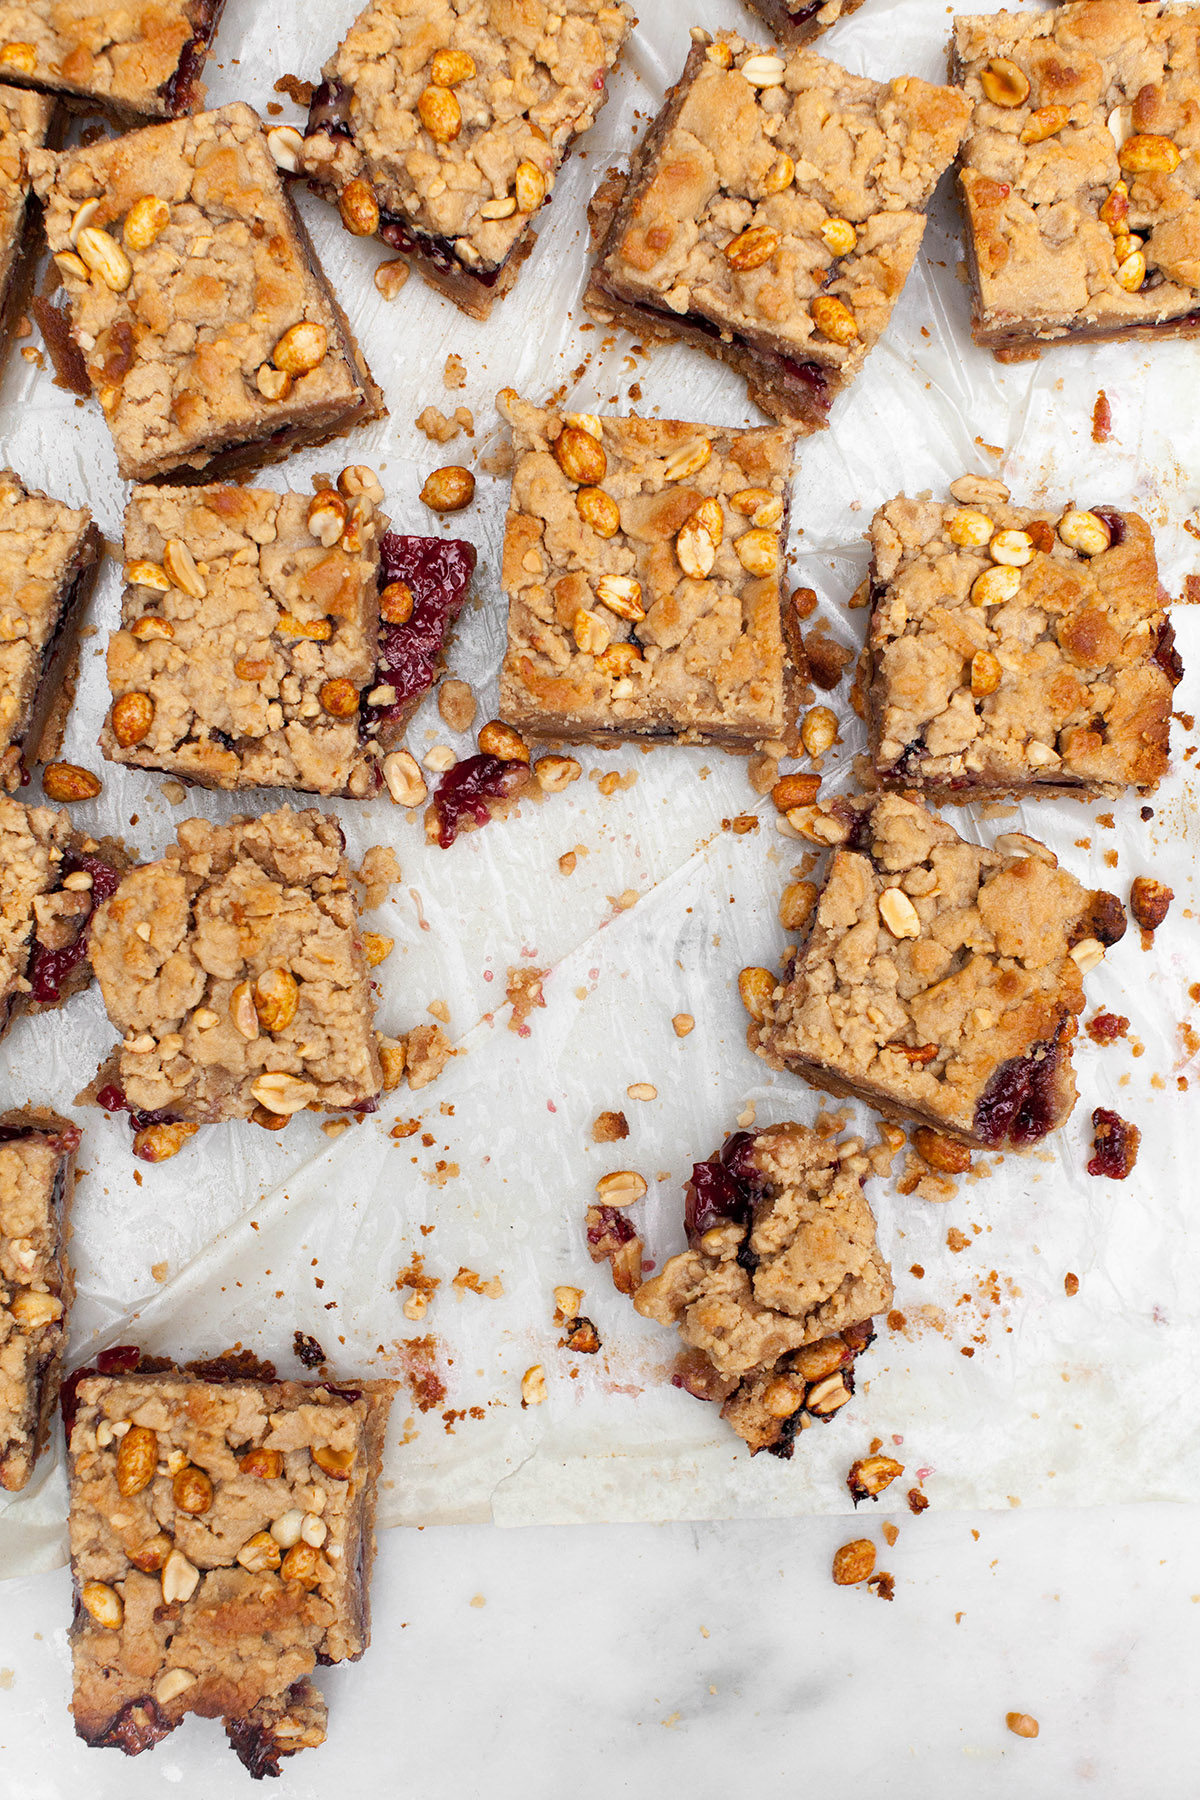 Peanut Butter and Jelly Squares